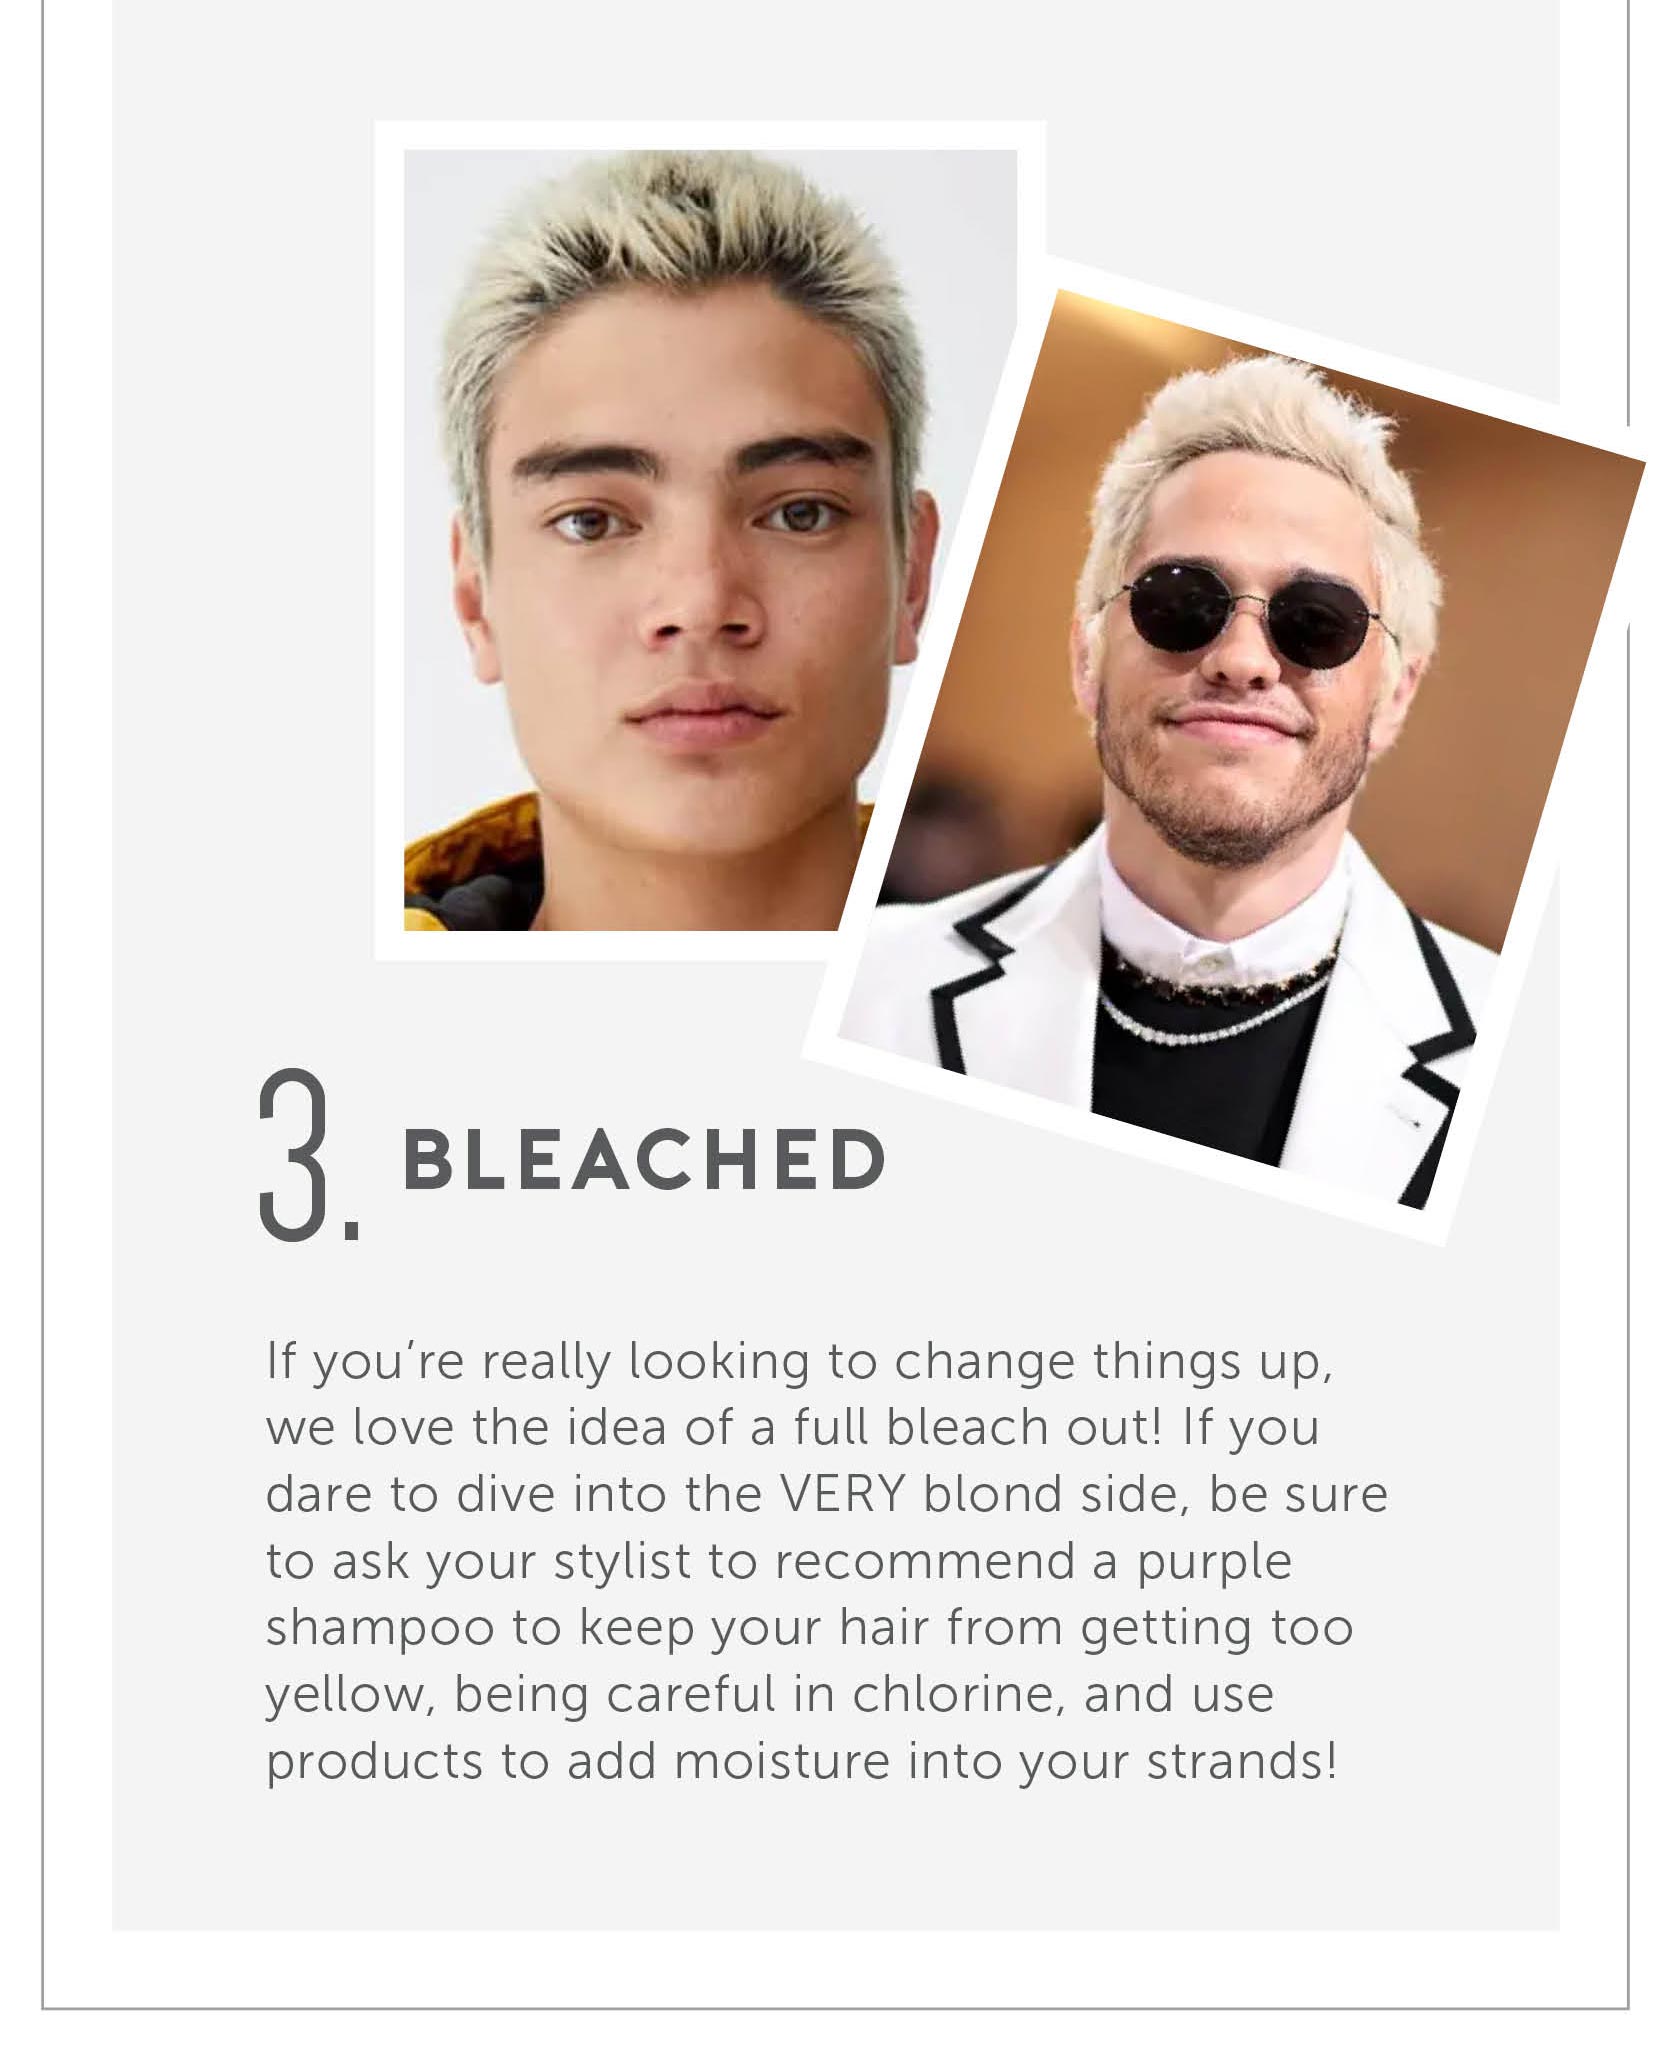 Bleached! If you’re really looking to change things up, we love the idea of a full bleach out! If you dare to dive into the VERY blond side, be sure to ask your stylist to recommend a purple shampoo to keep your hair from getting too yellow, being careful in chlorine, and use products to add moisture into your strands! 